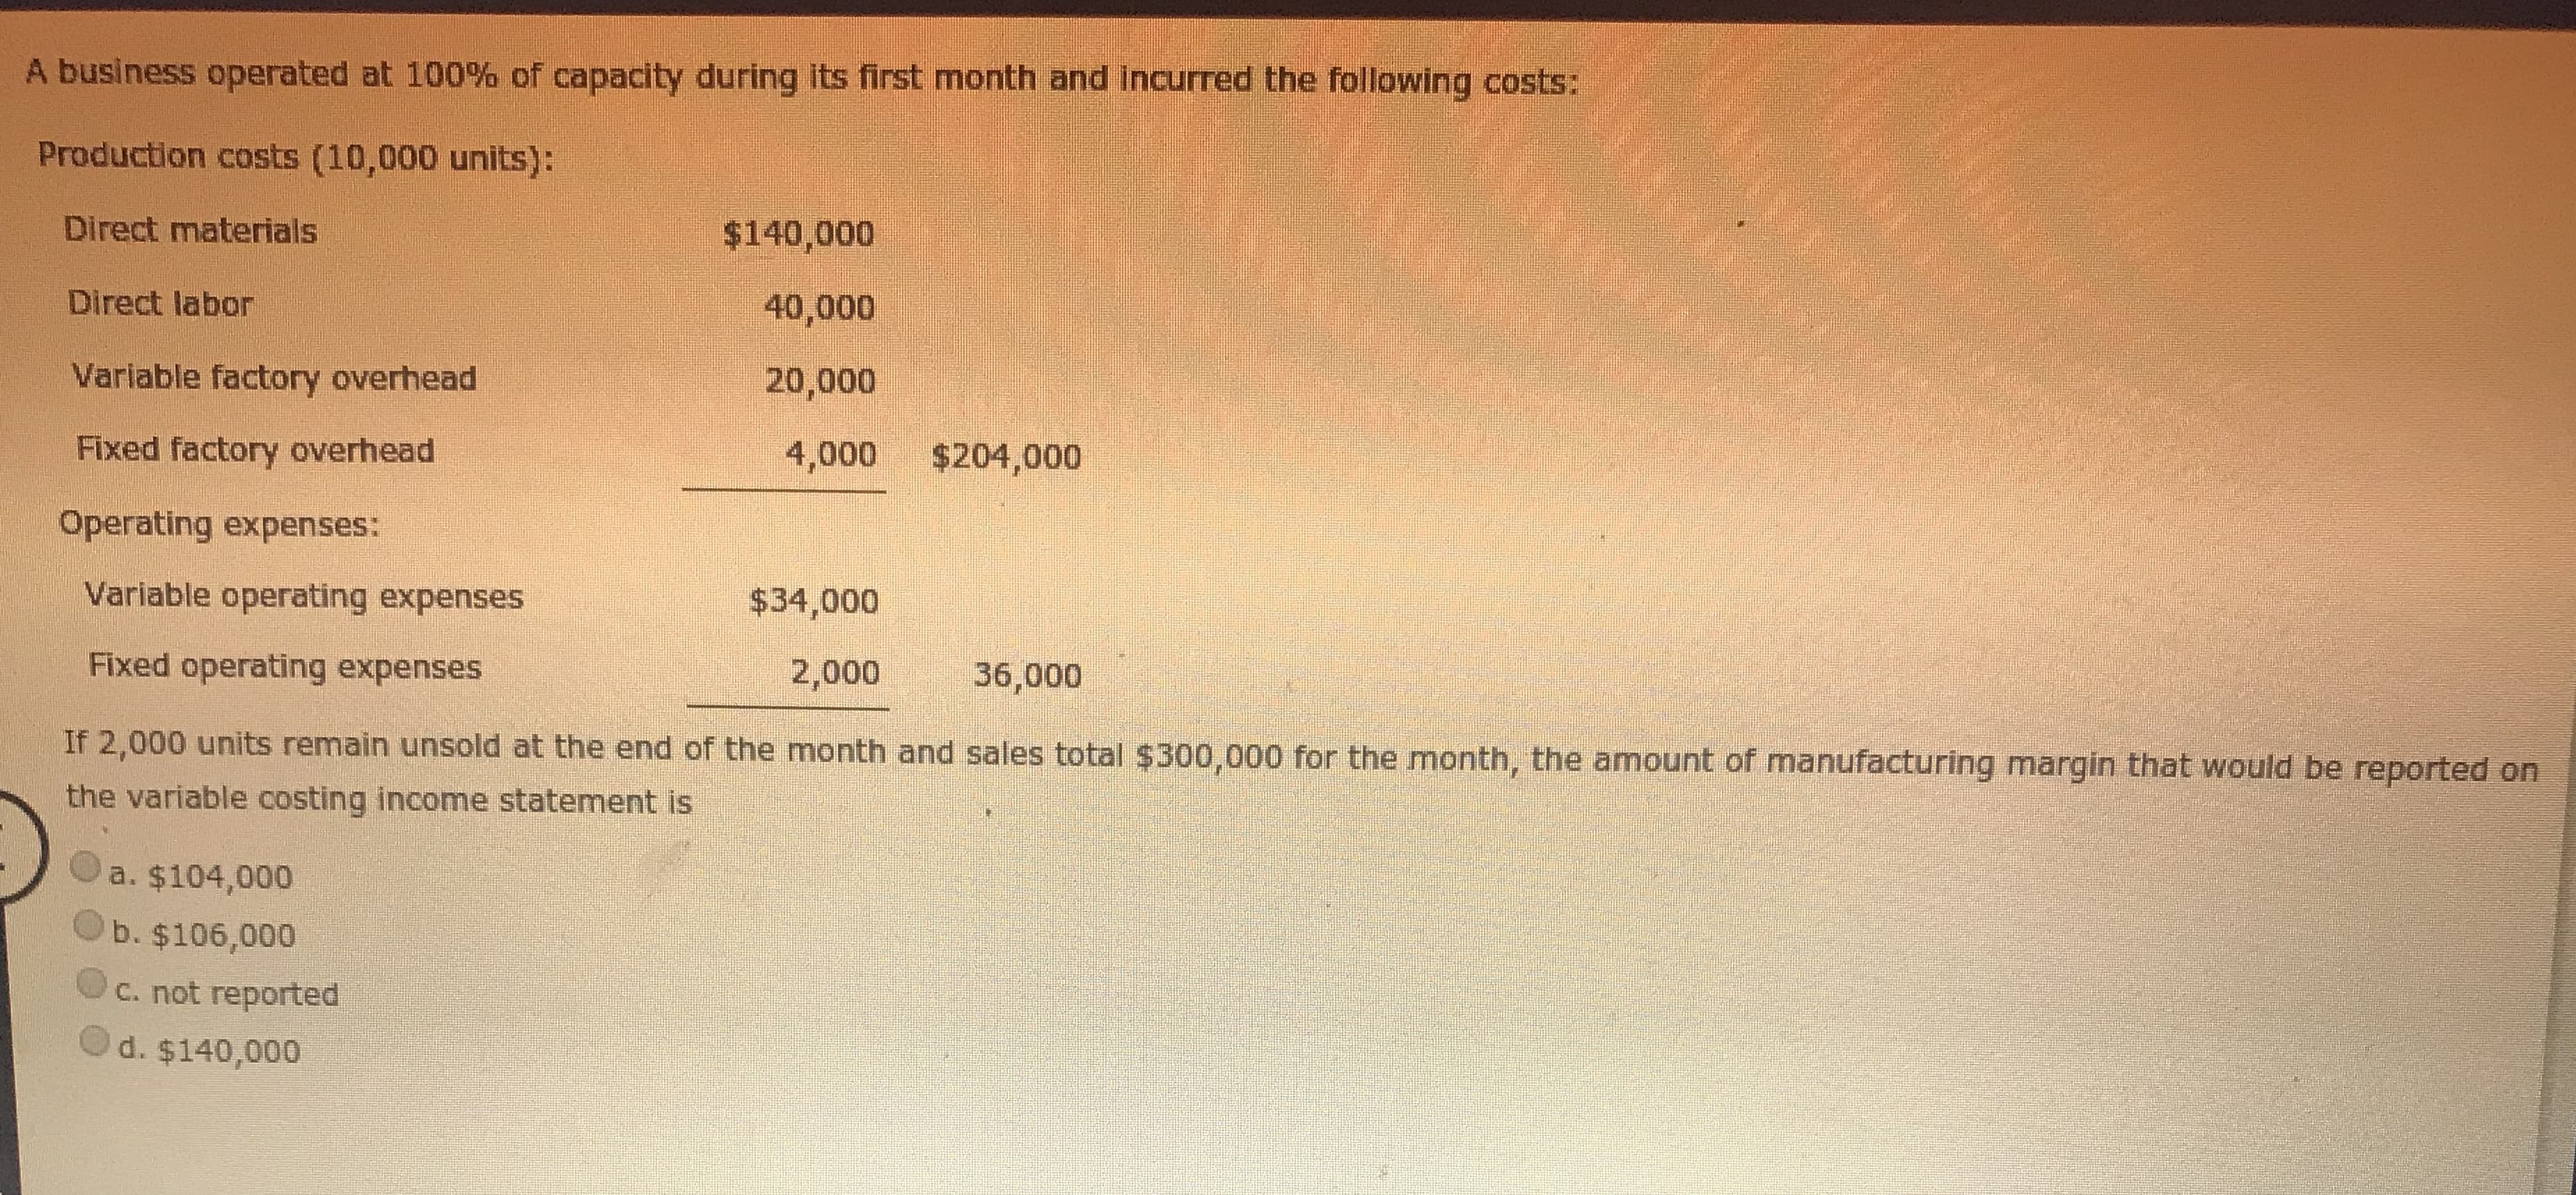 If 2,000 units remain unsold at the end of the month and sales total $300,000 for the month, the amount of manufacturing margin that would be reported on
the variable costing income statement is
